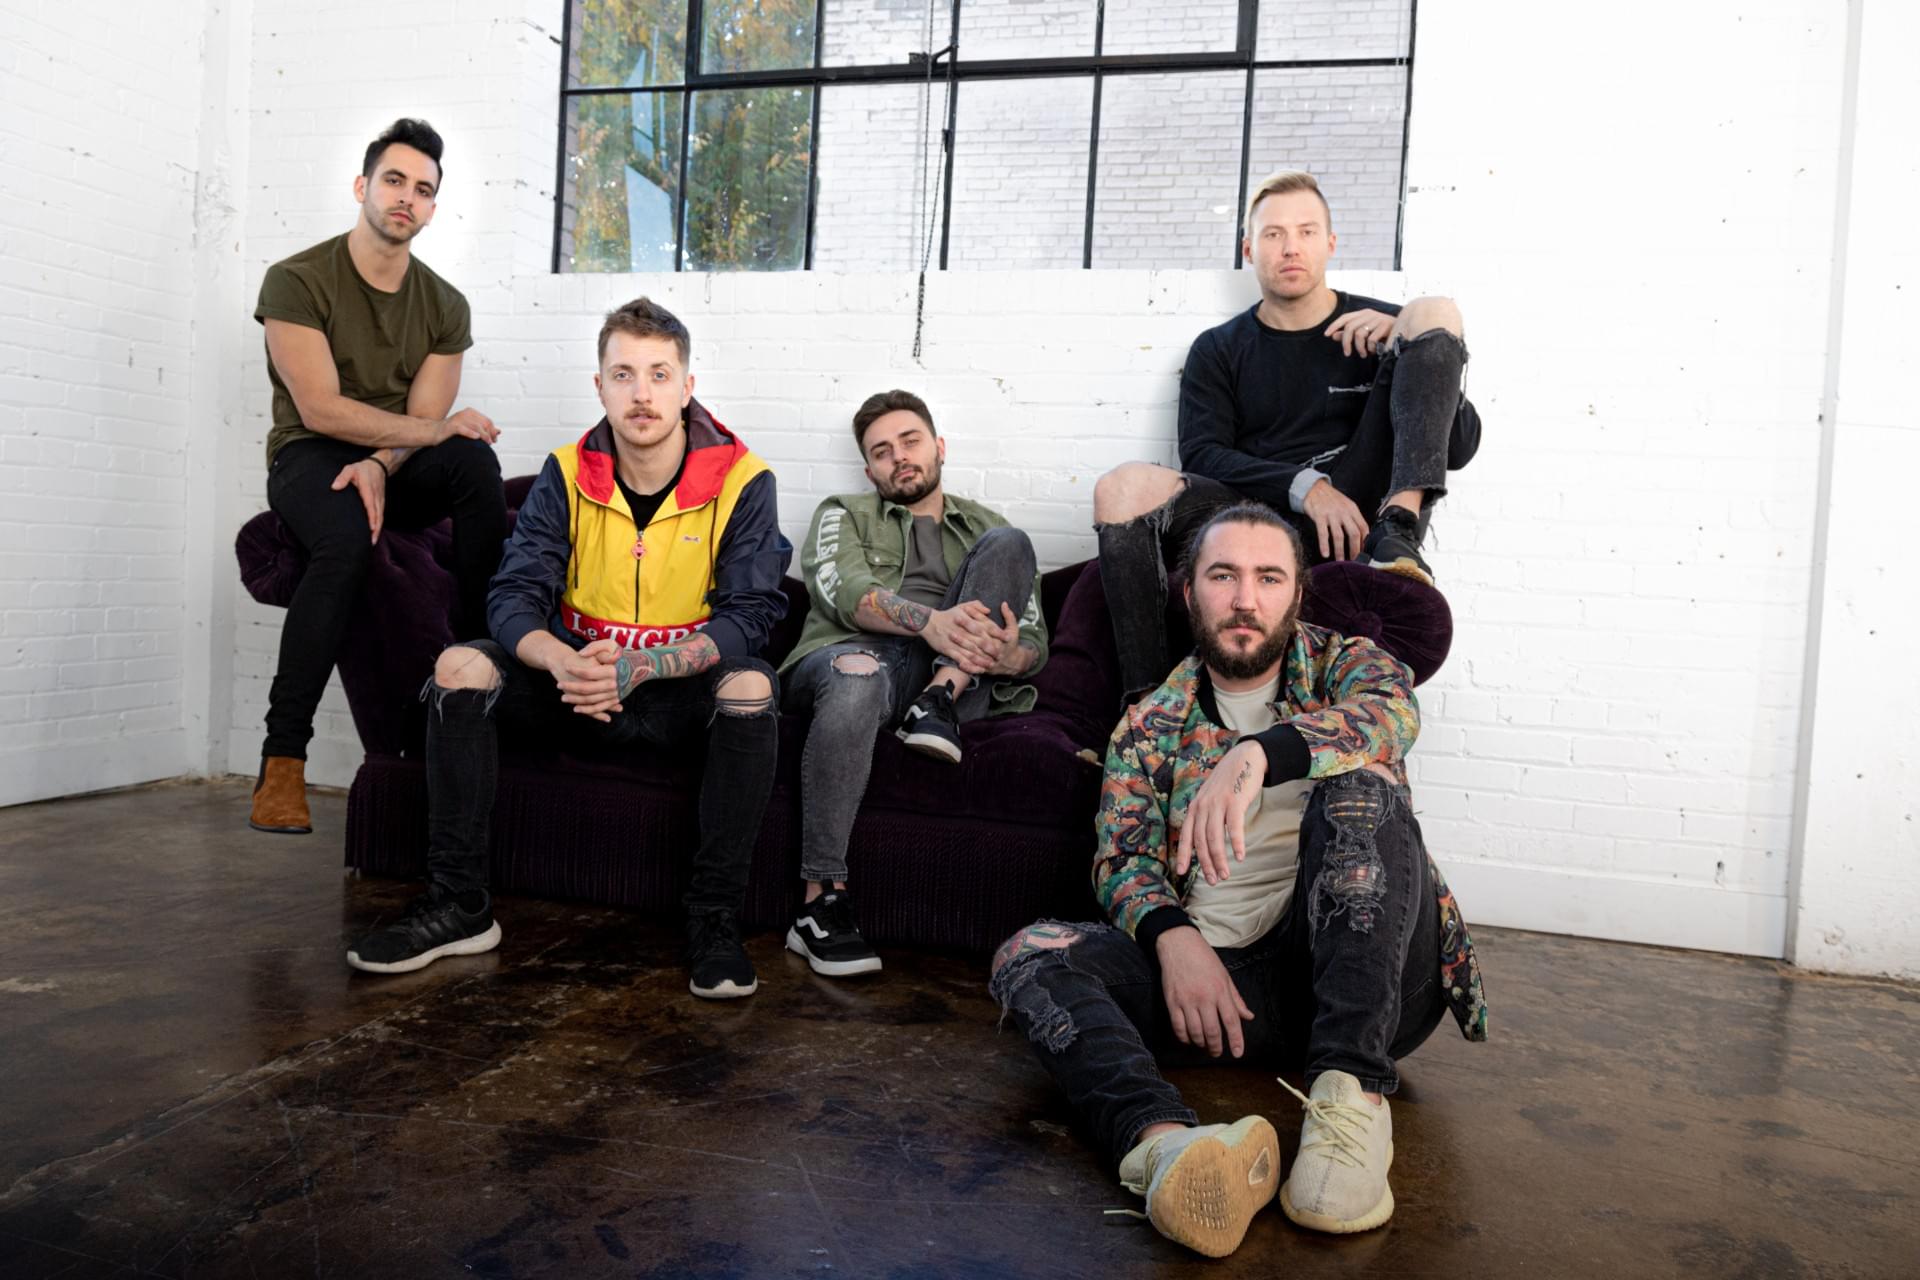 I Prevail Releases Official Music Video for ‘Every Time You Leave’ Featuring Delaney Jane